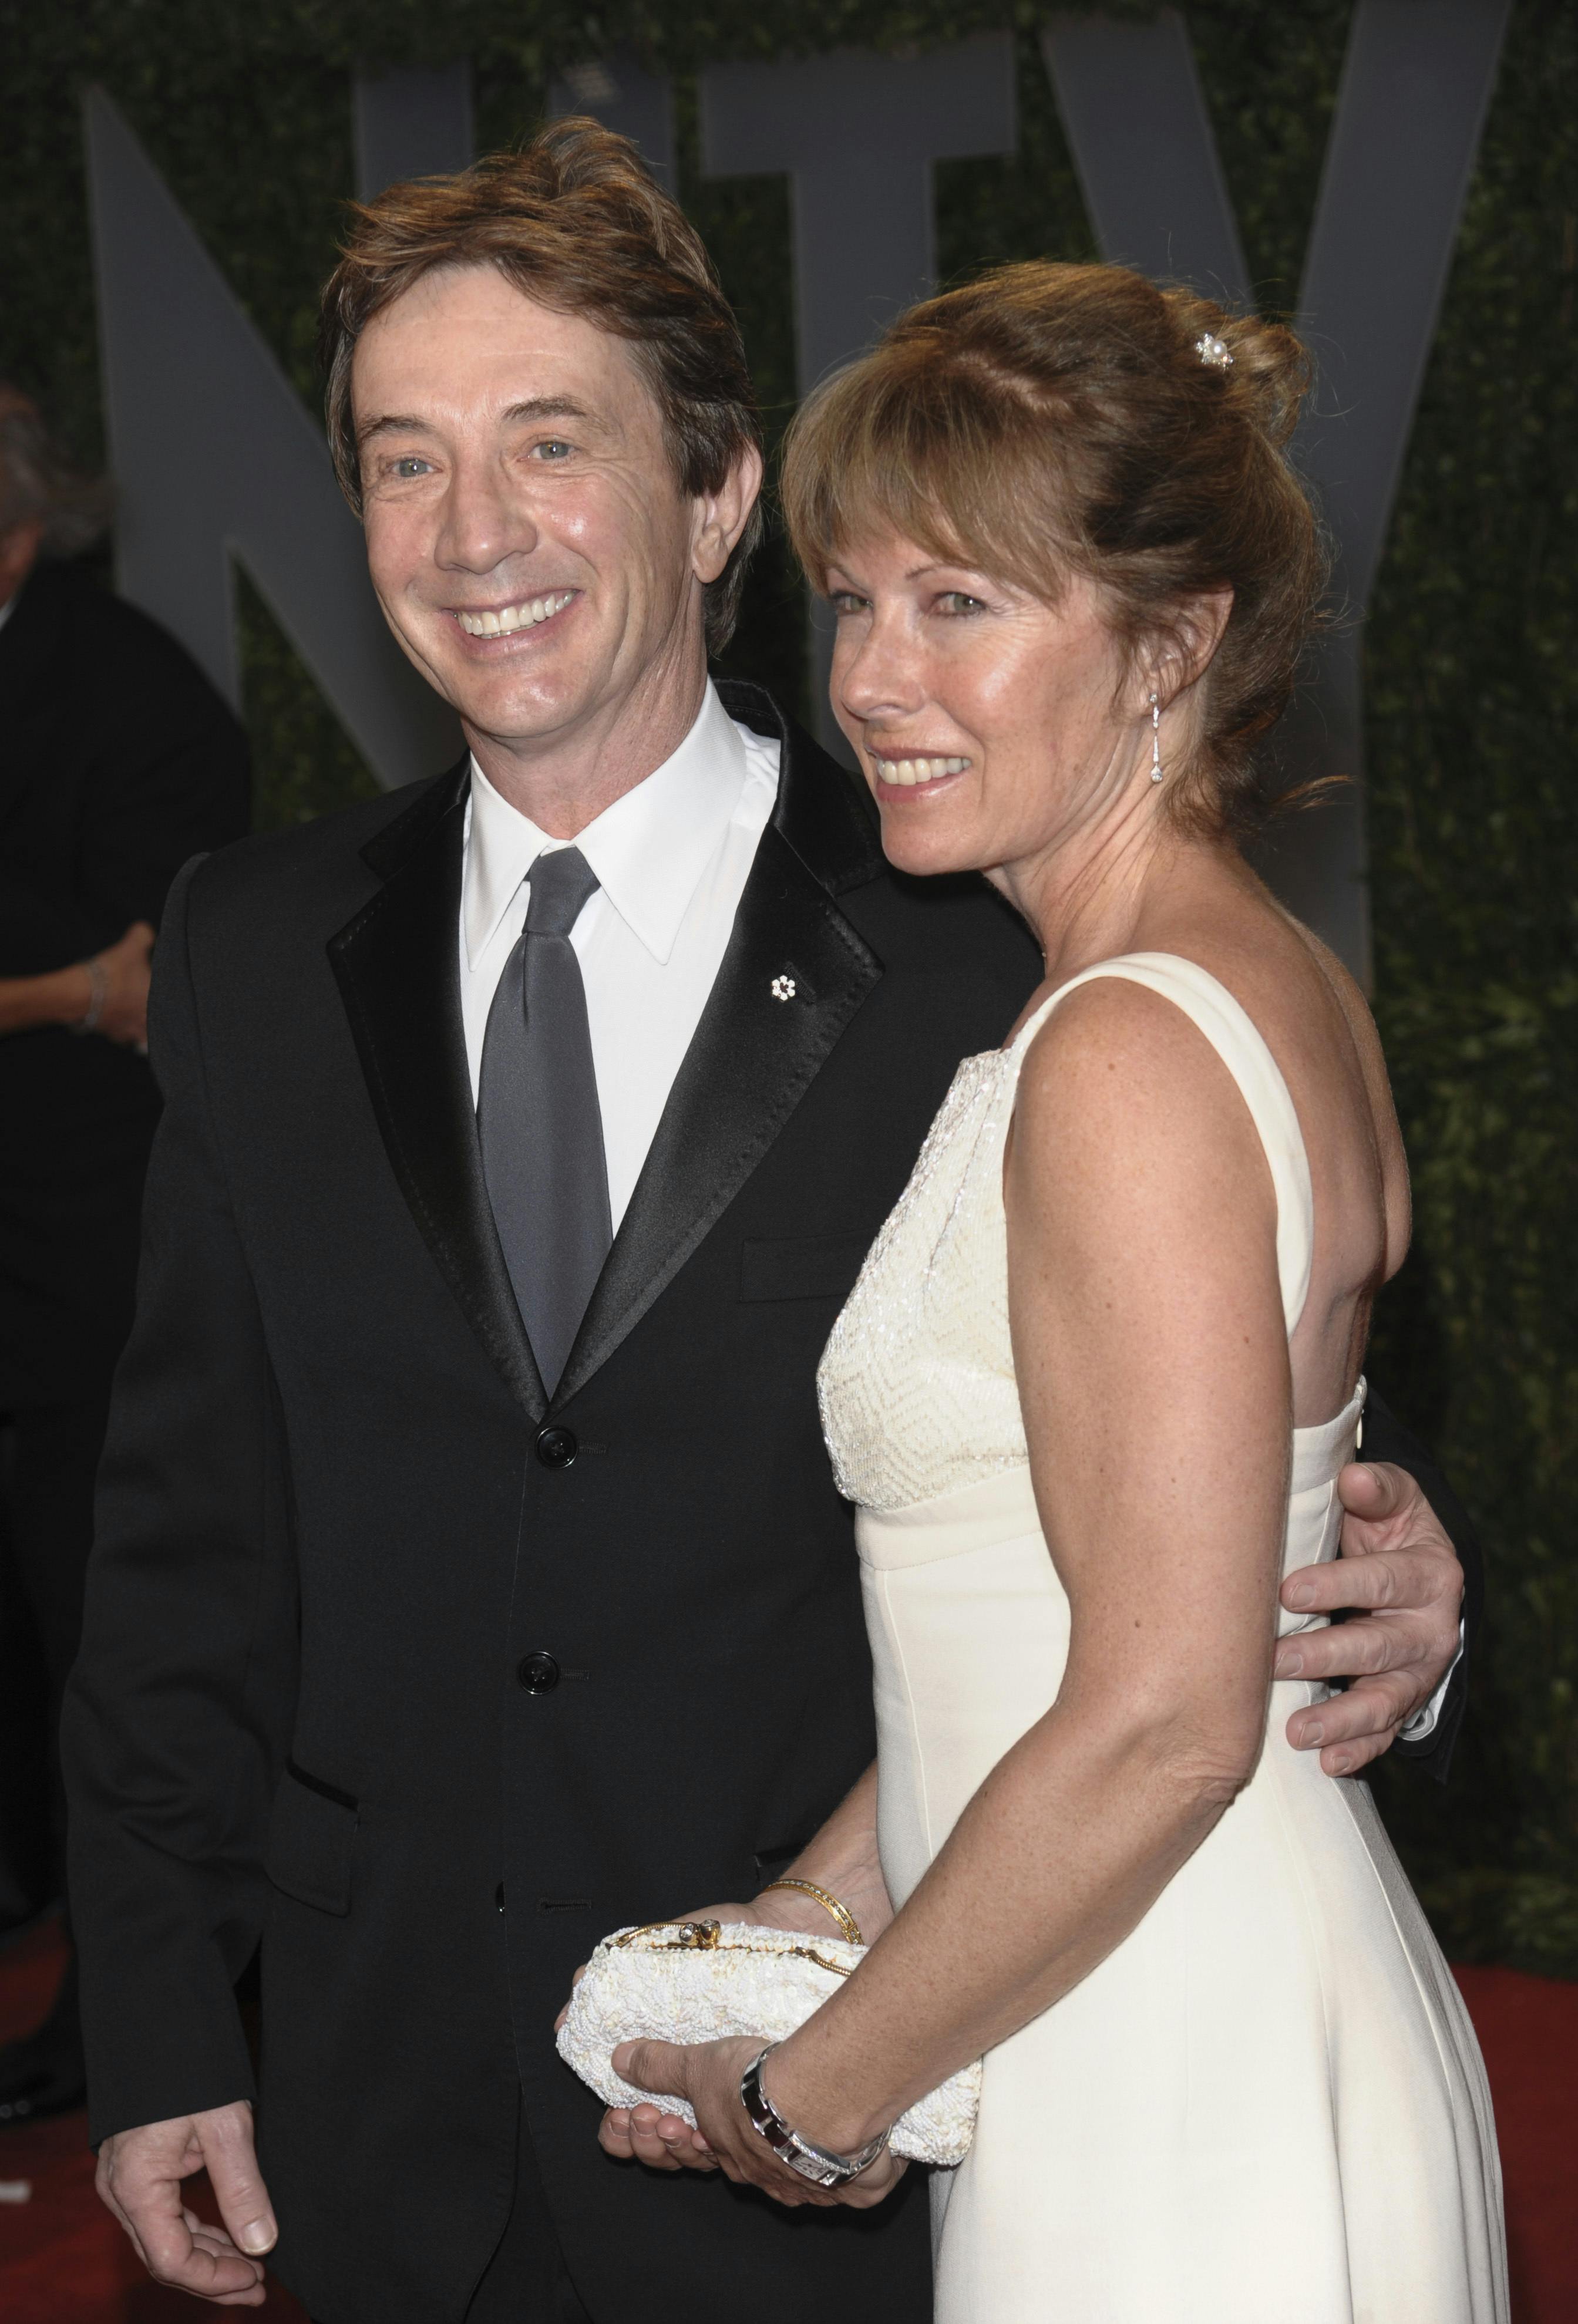 Actor Martin Short and his wife Nancy Dolman arrive at the Vanity Fair Oscar party on Sunday, Feb. 22, 2009, in West Hollywood, Calif. (AP Photo/Evan Agostini)